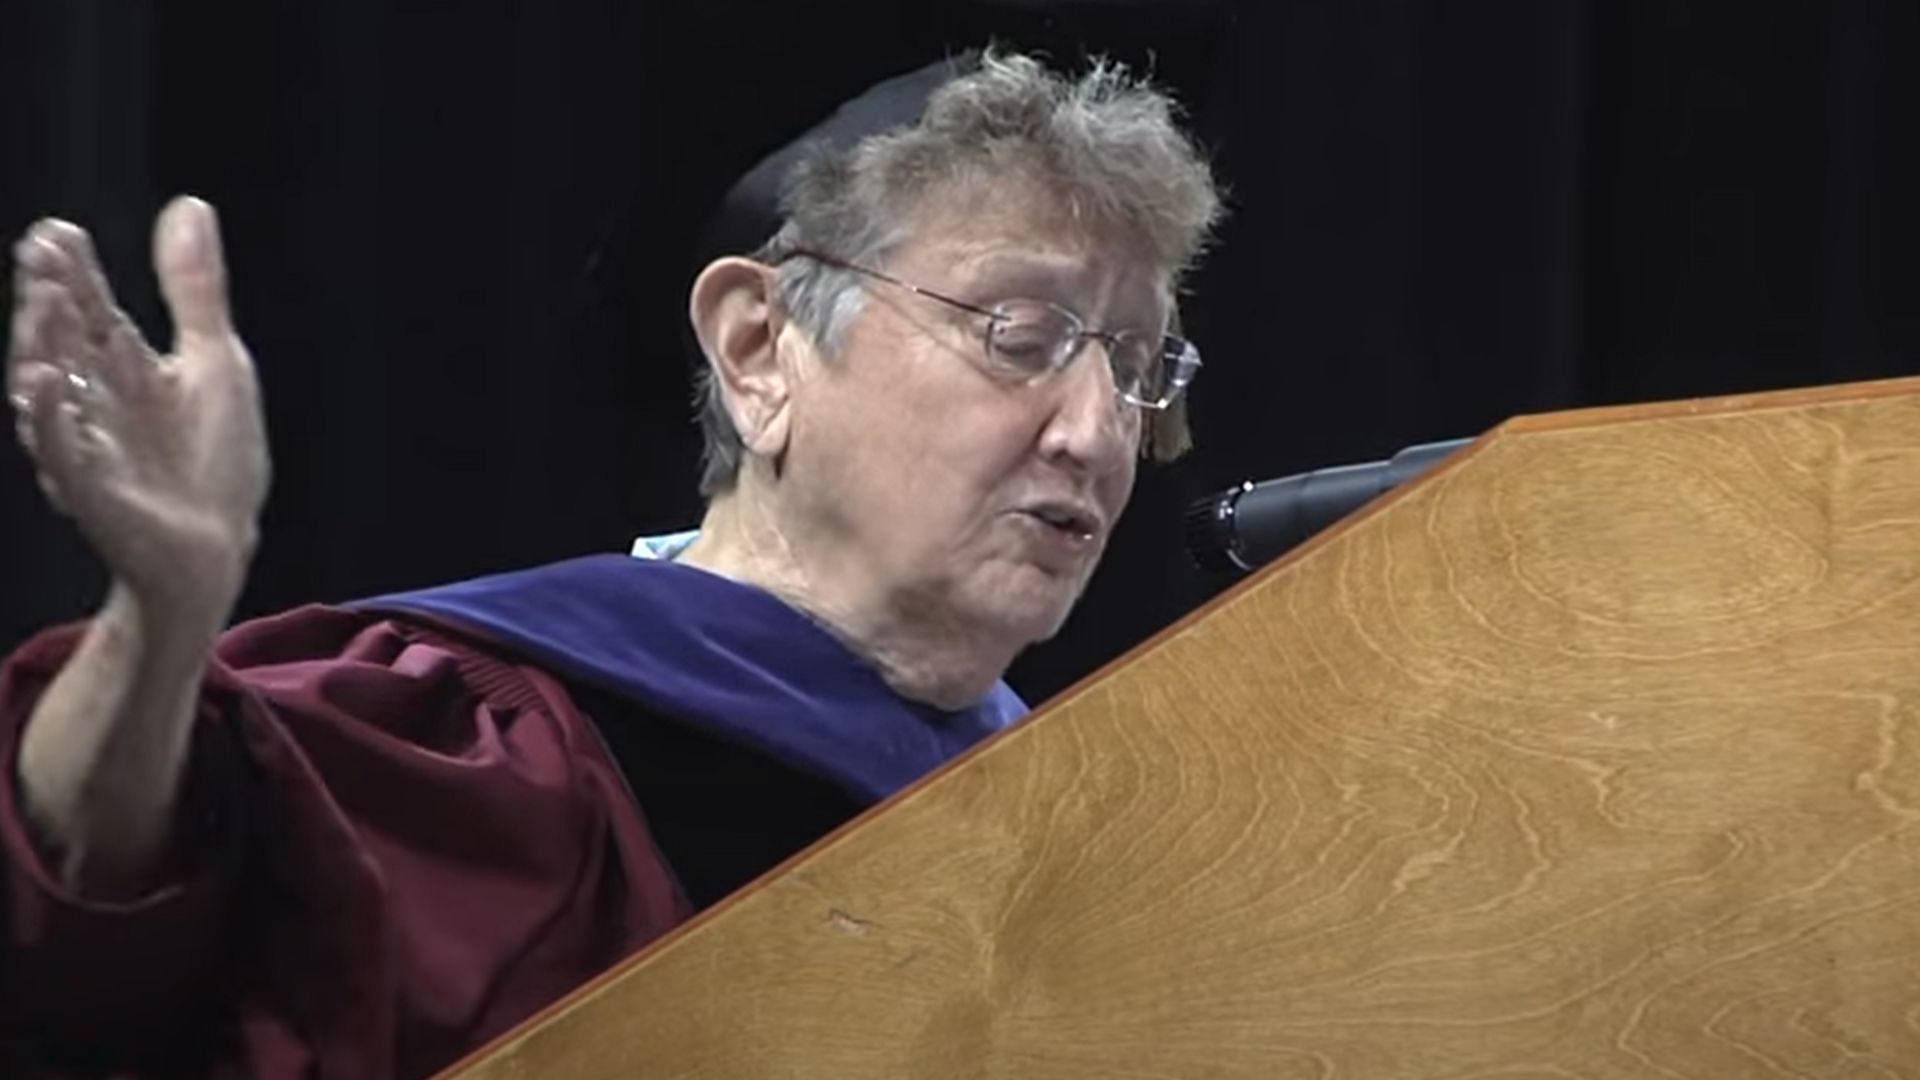 Justice Jean Toal during a speech (Image via University of South Carolina)